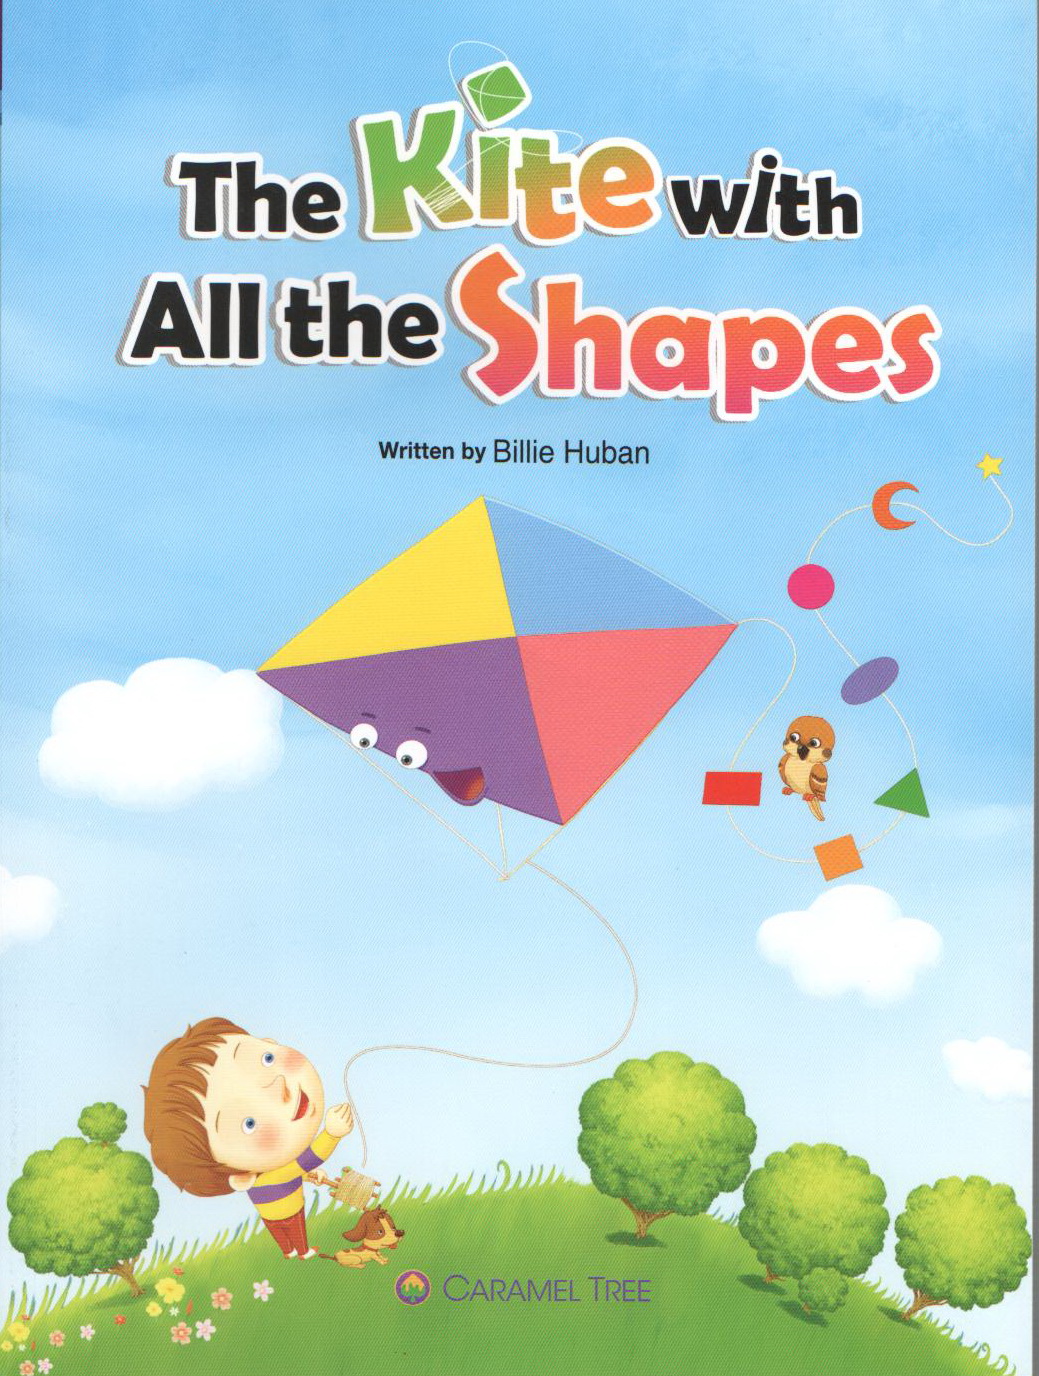 CARAMEL TREE 1:THE KITE WITH ALL THE SHAPES BY DKTODAY